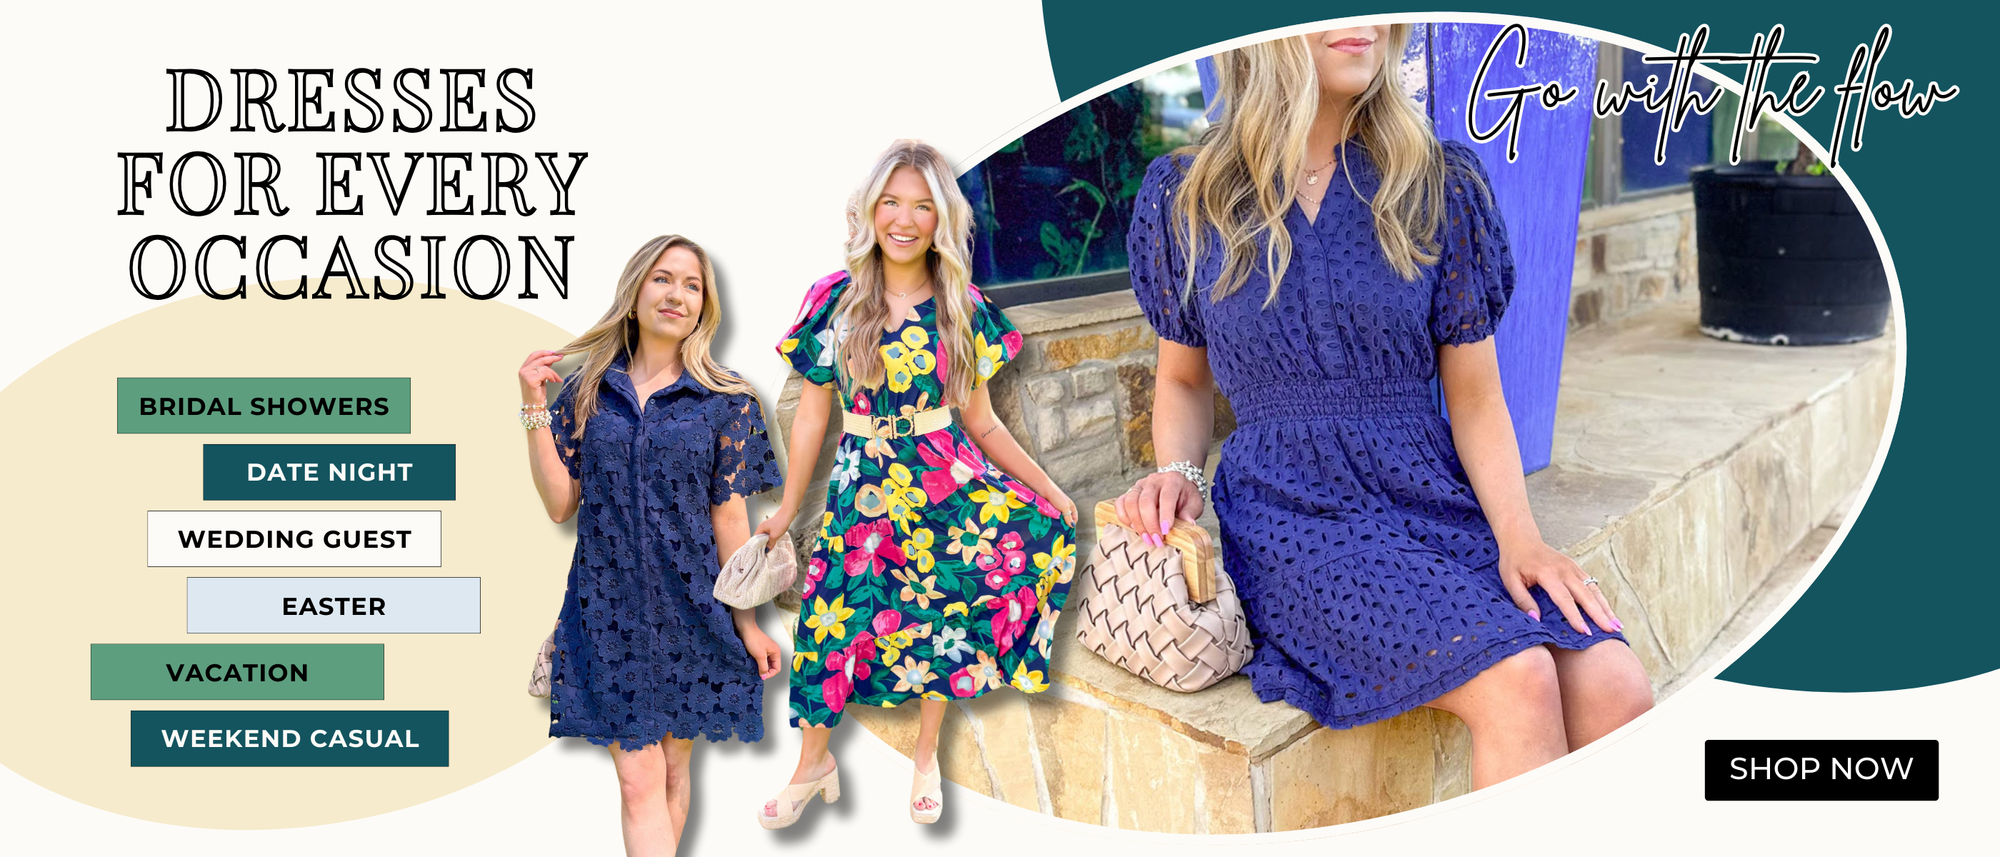 Go with the Flow. Dresses for Every Occasion: bridal showers, date night, wedding guest, easter, vacation and weekend casual. Models wearing navy dresses in different lengths with multiple textures and patterns.